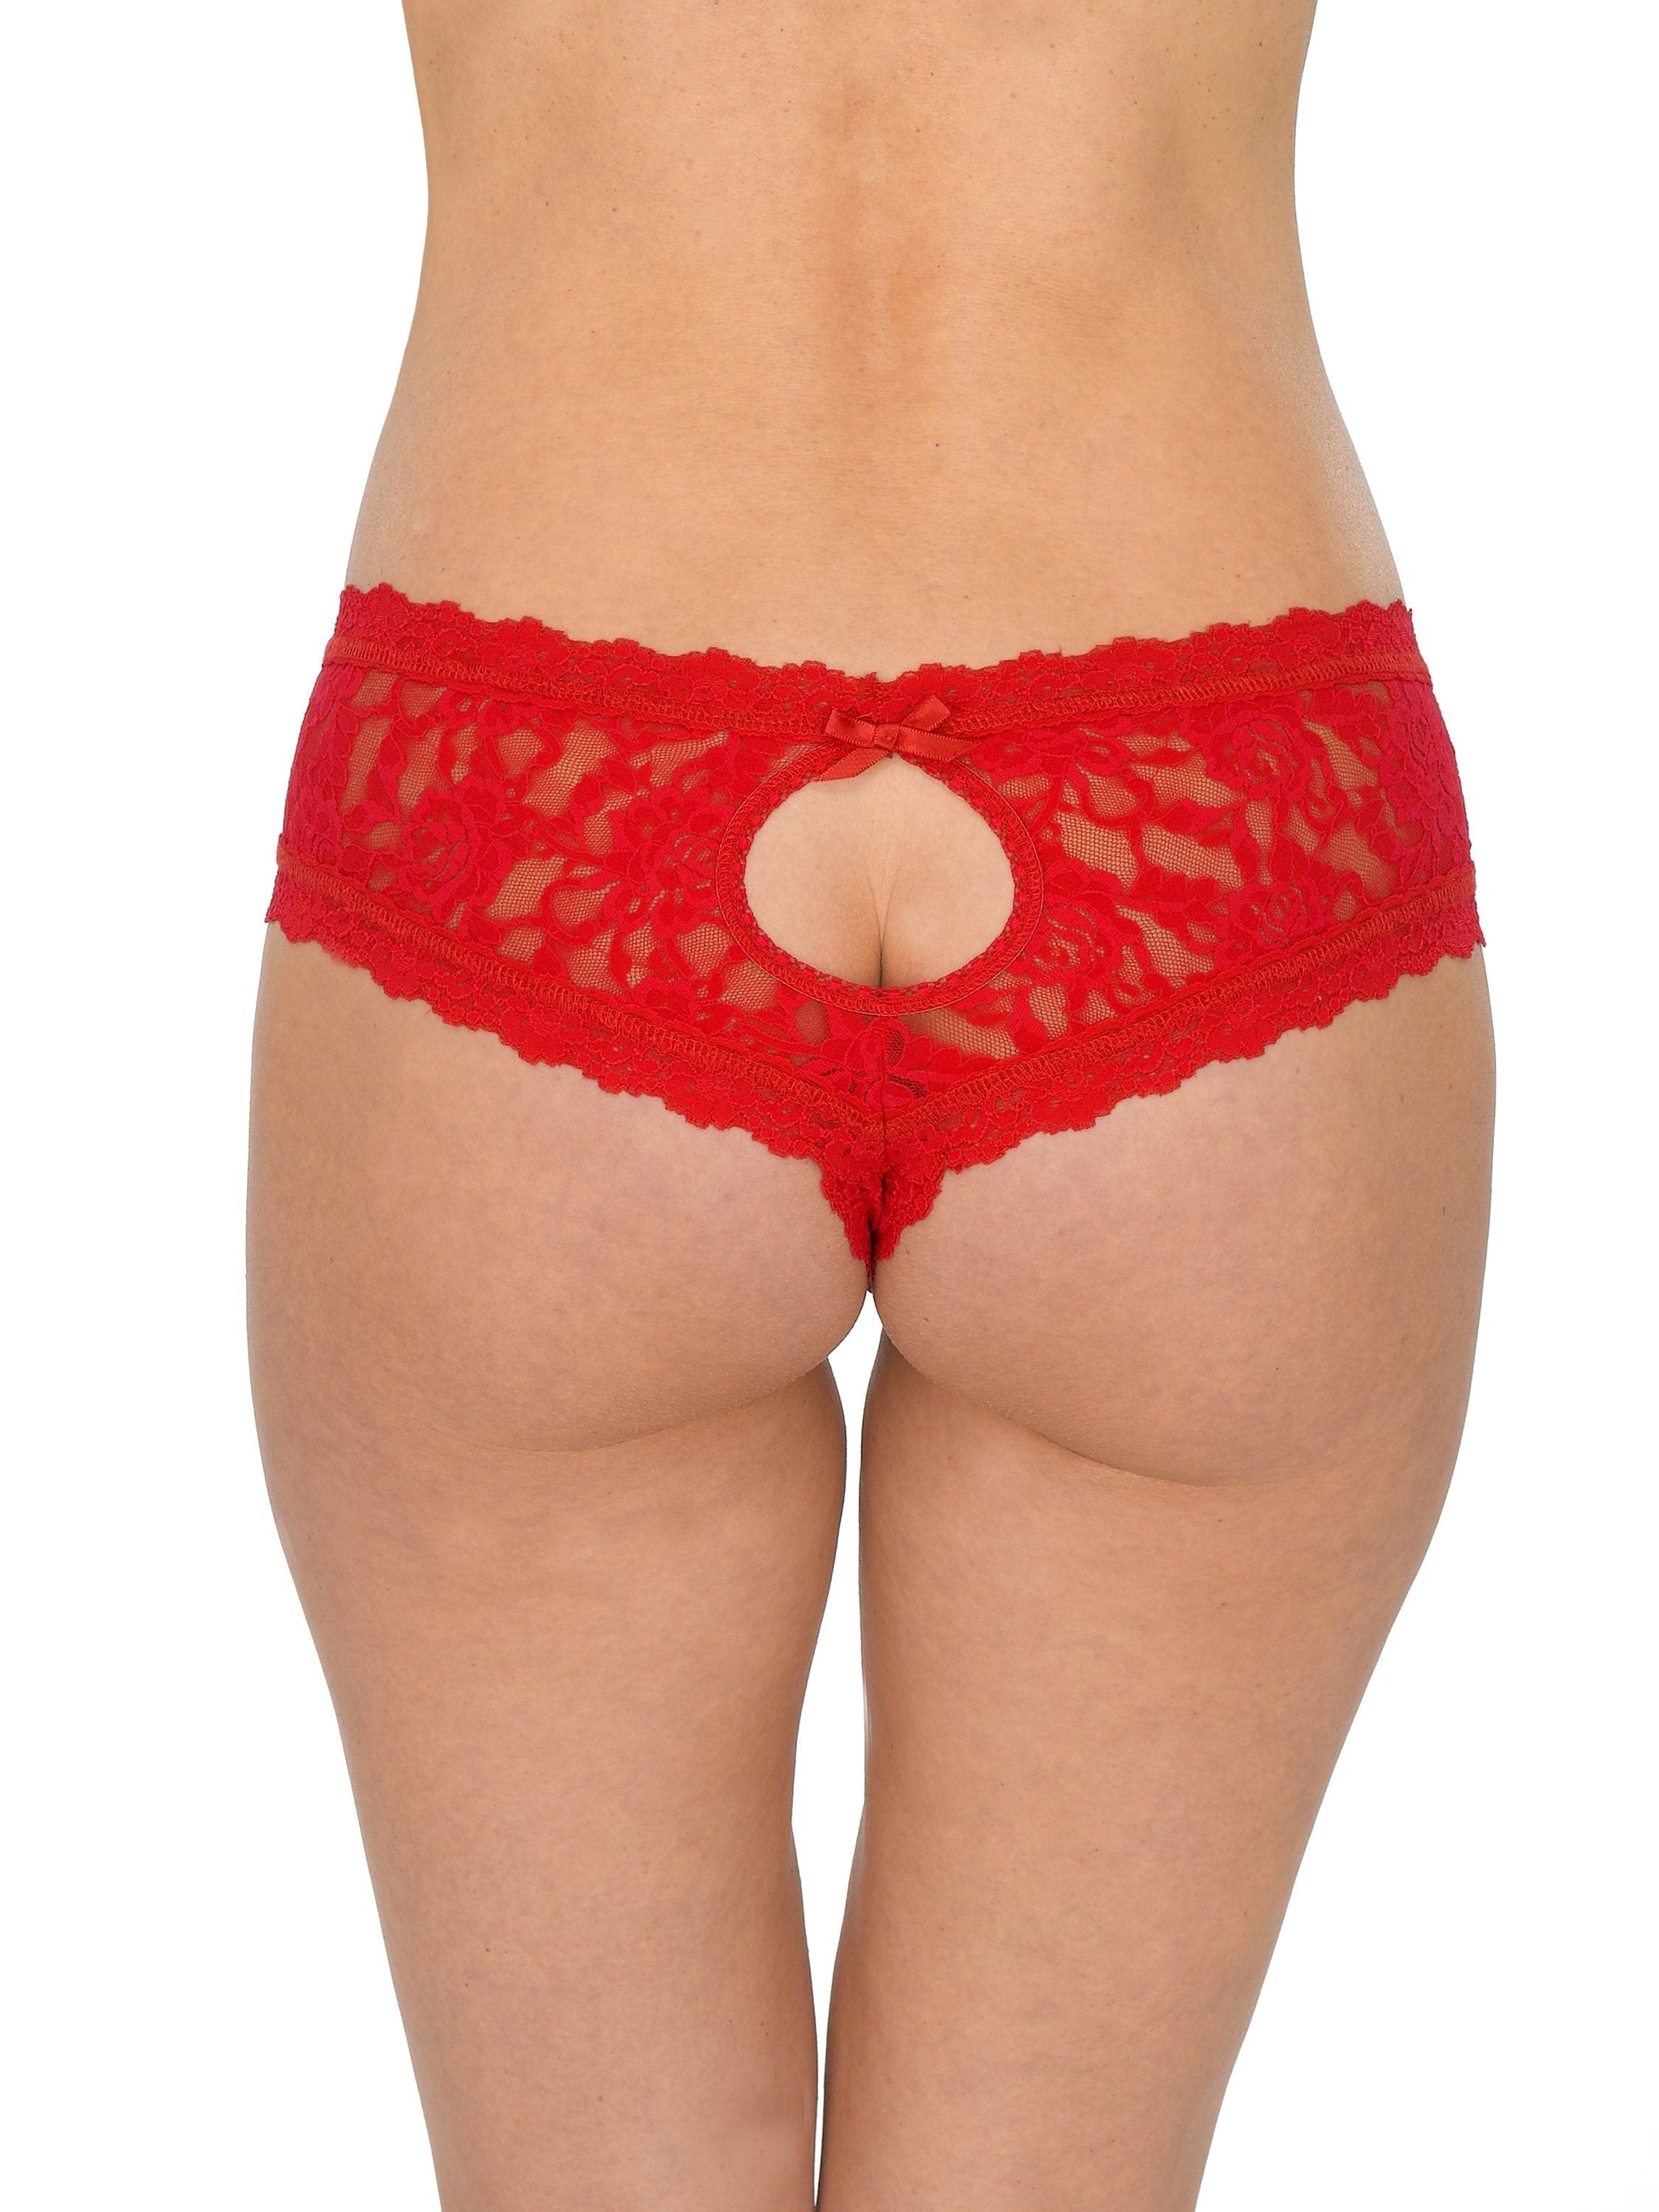 Red Lace Crotchless Panties for a Woman, Sexy Panties for Amazing